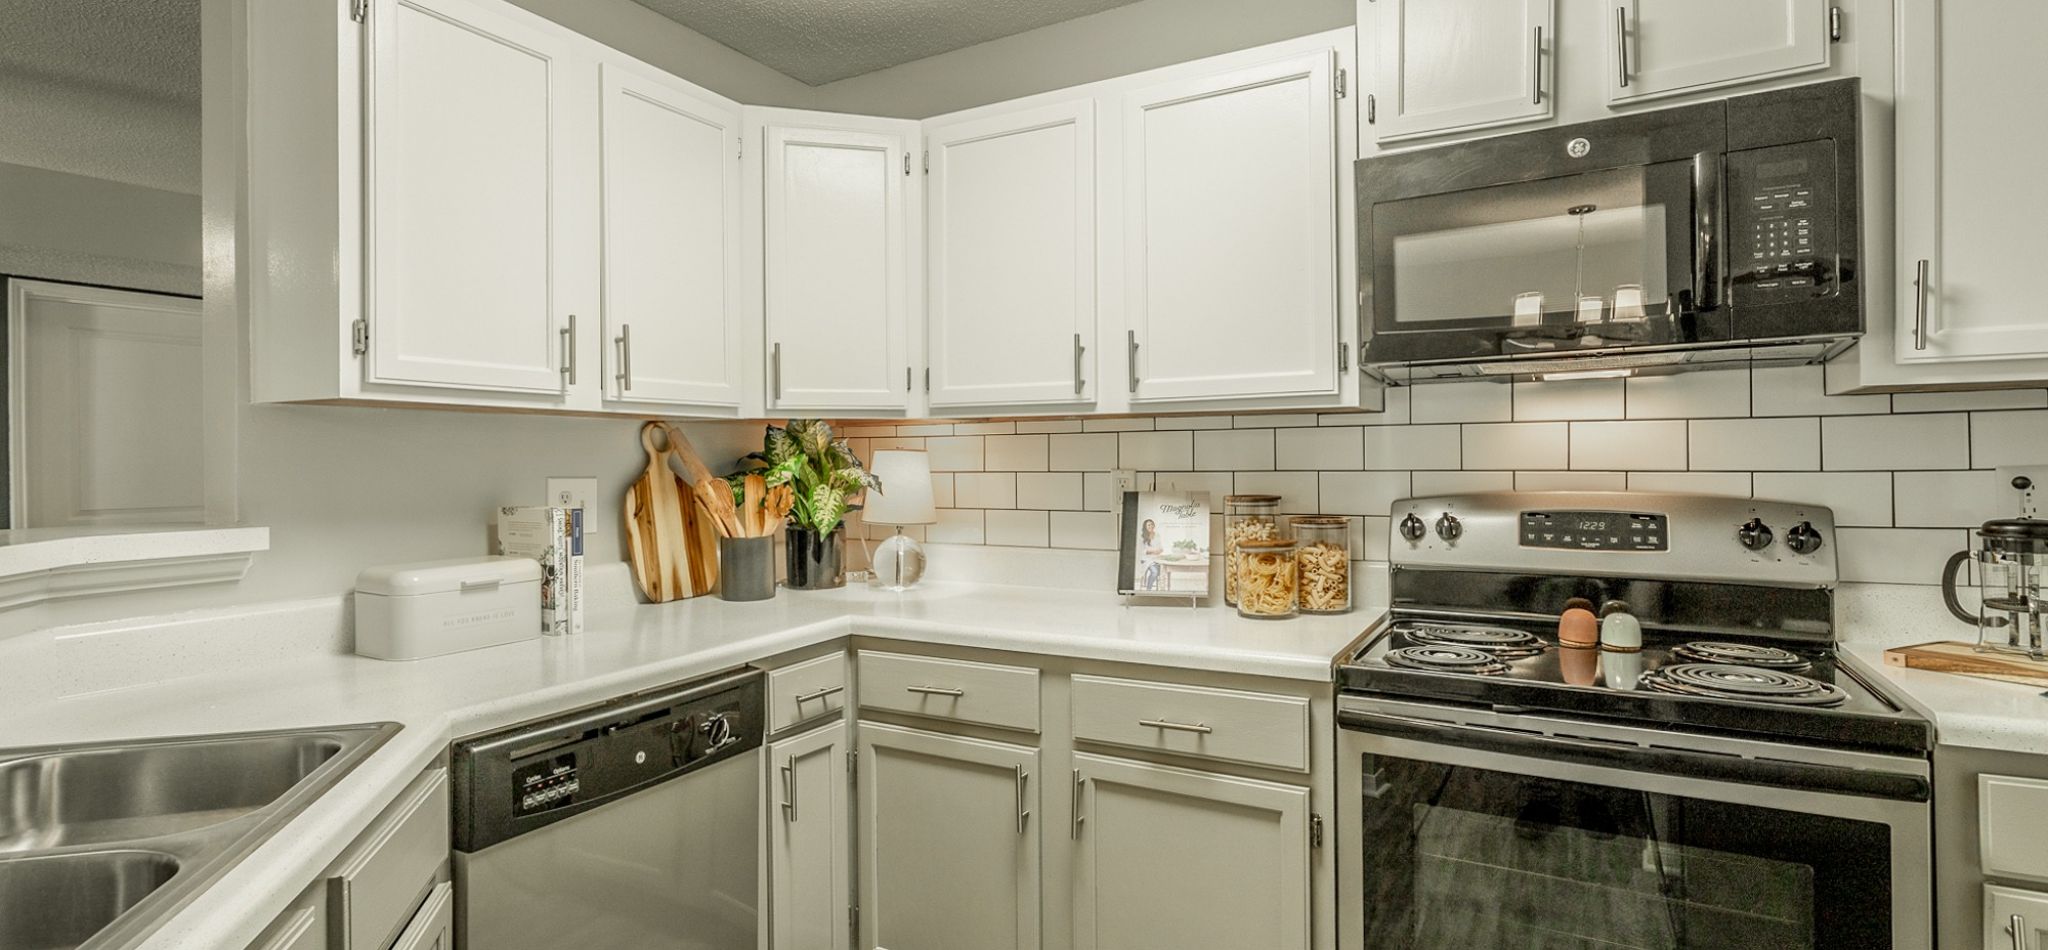 Hawthorne Park South apartment kitchen interior with tile backsplash, stainless steel appliances, and white cabinetry